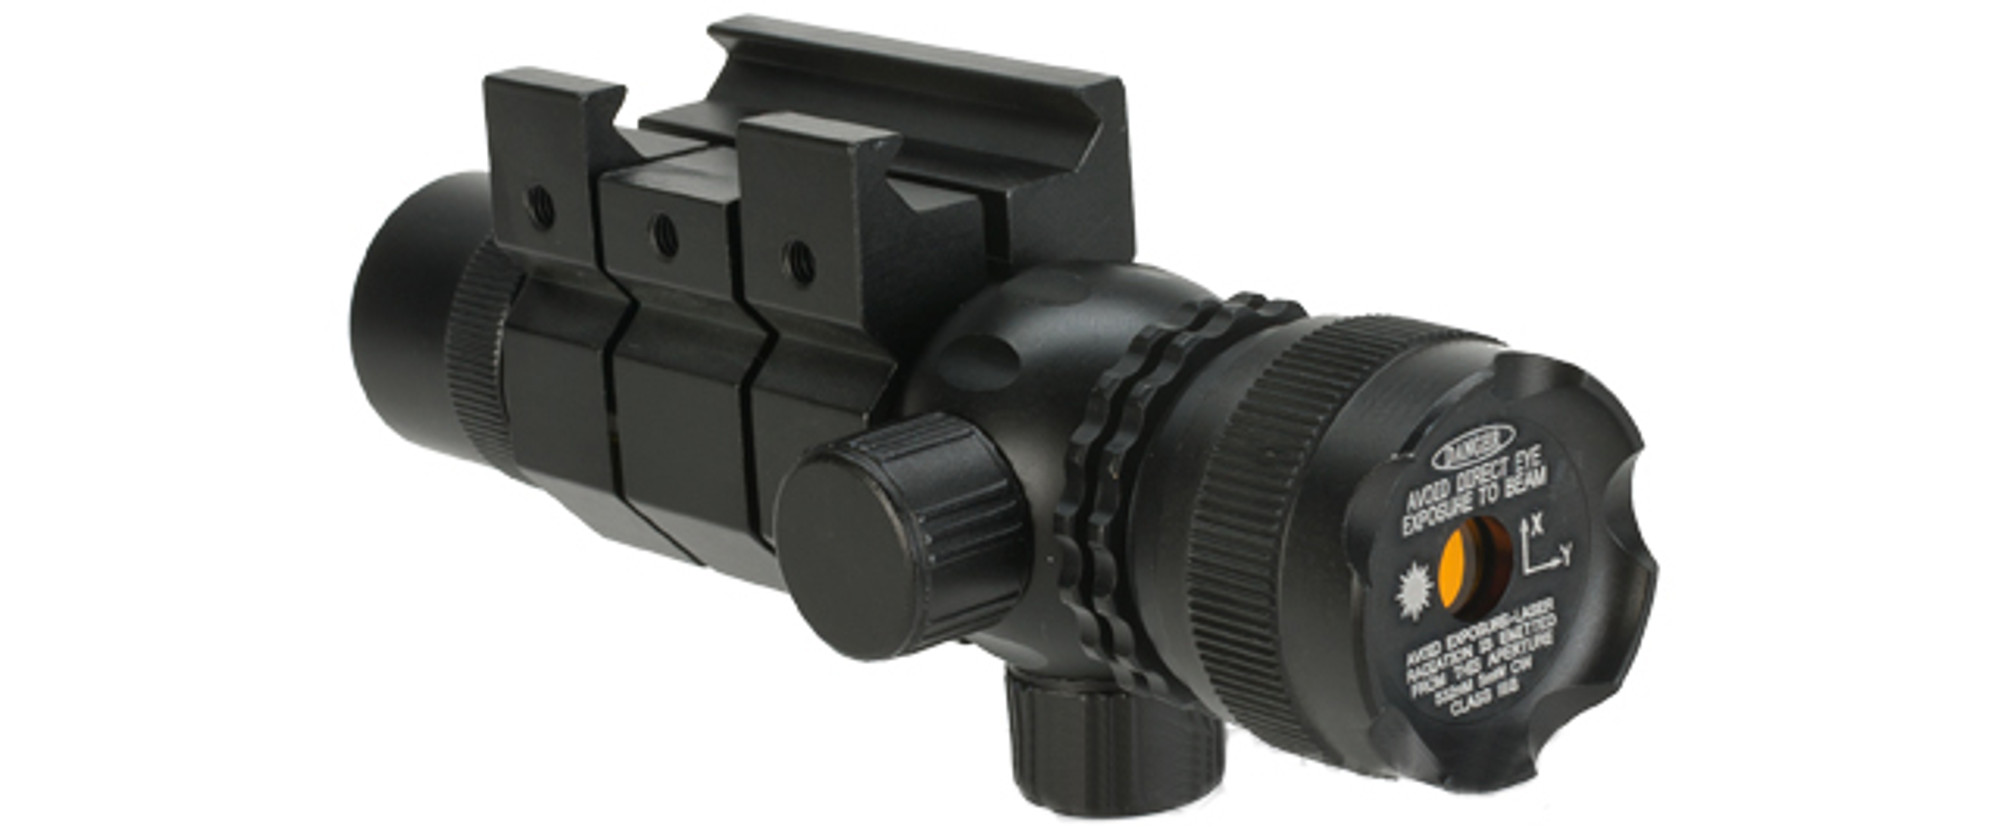 AIM Green Laser Sight Aiming Module System w/ Integrated Mount